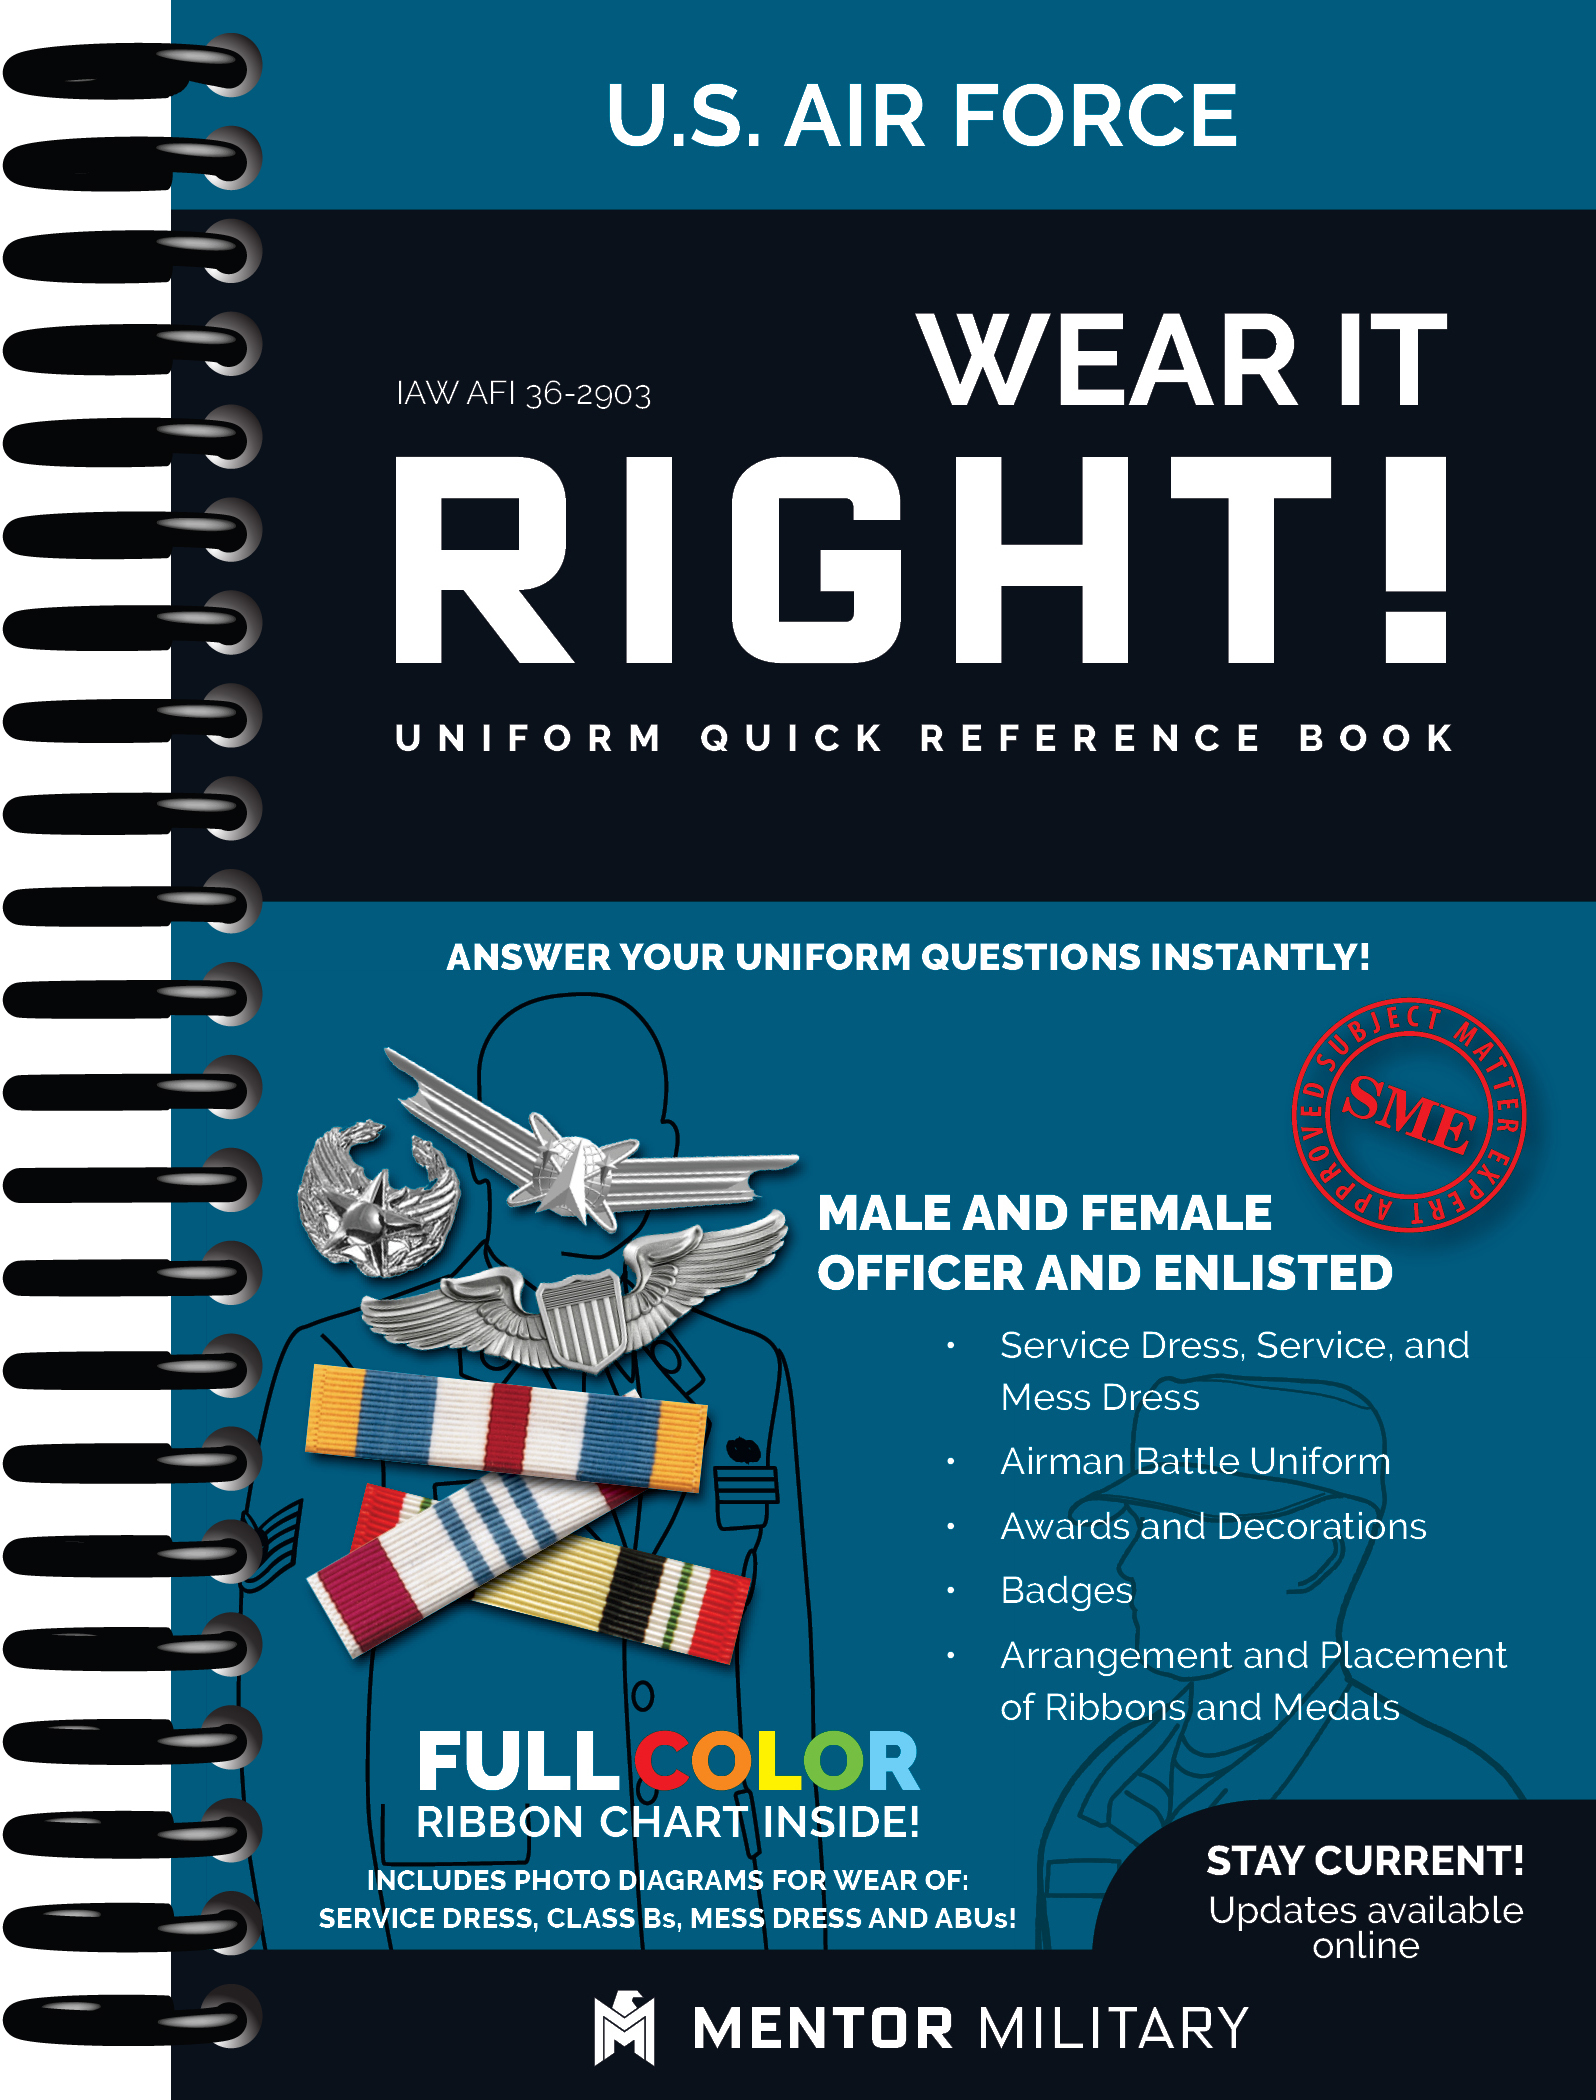 Wear It Right! – U.S. Air Force Uniform Quick Reference Book (WIR)